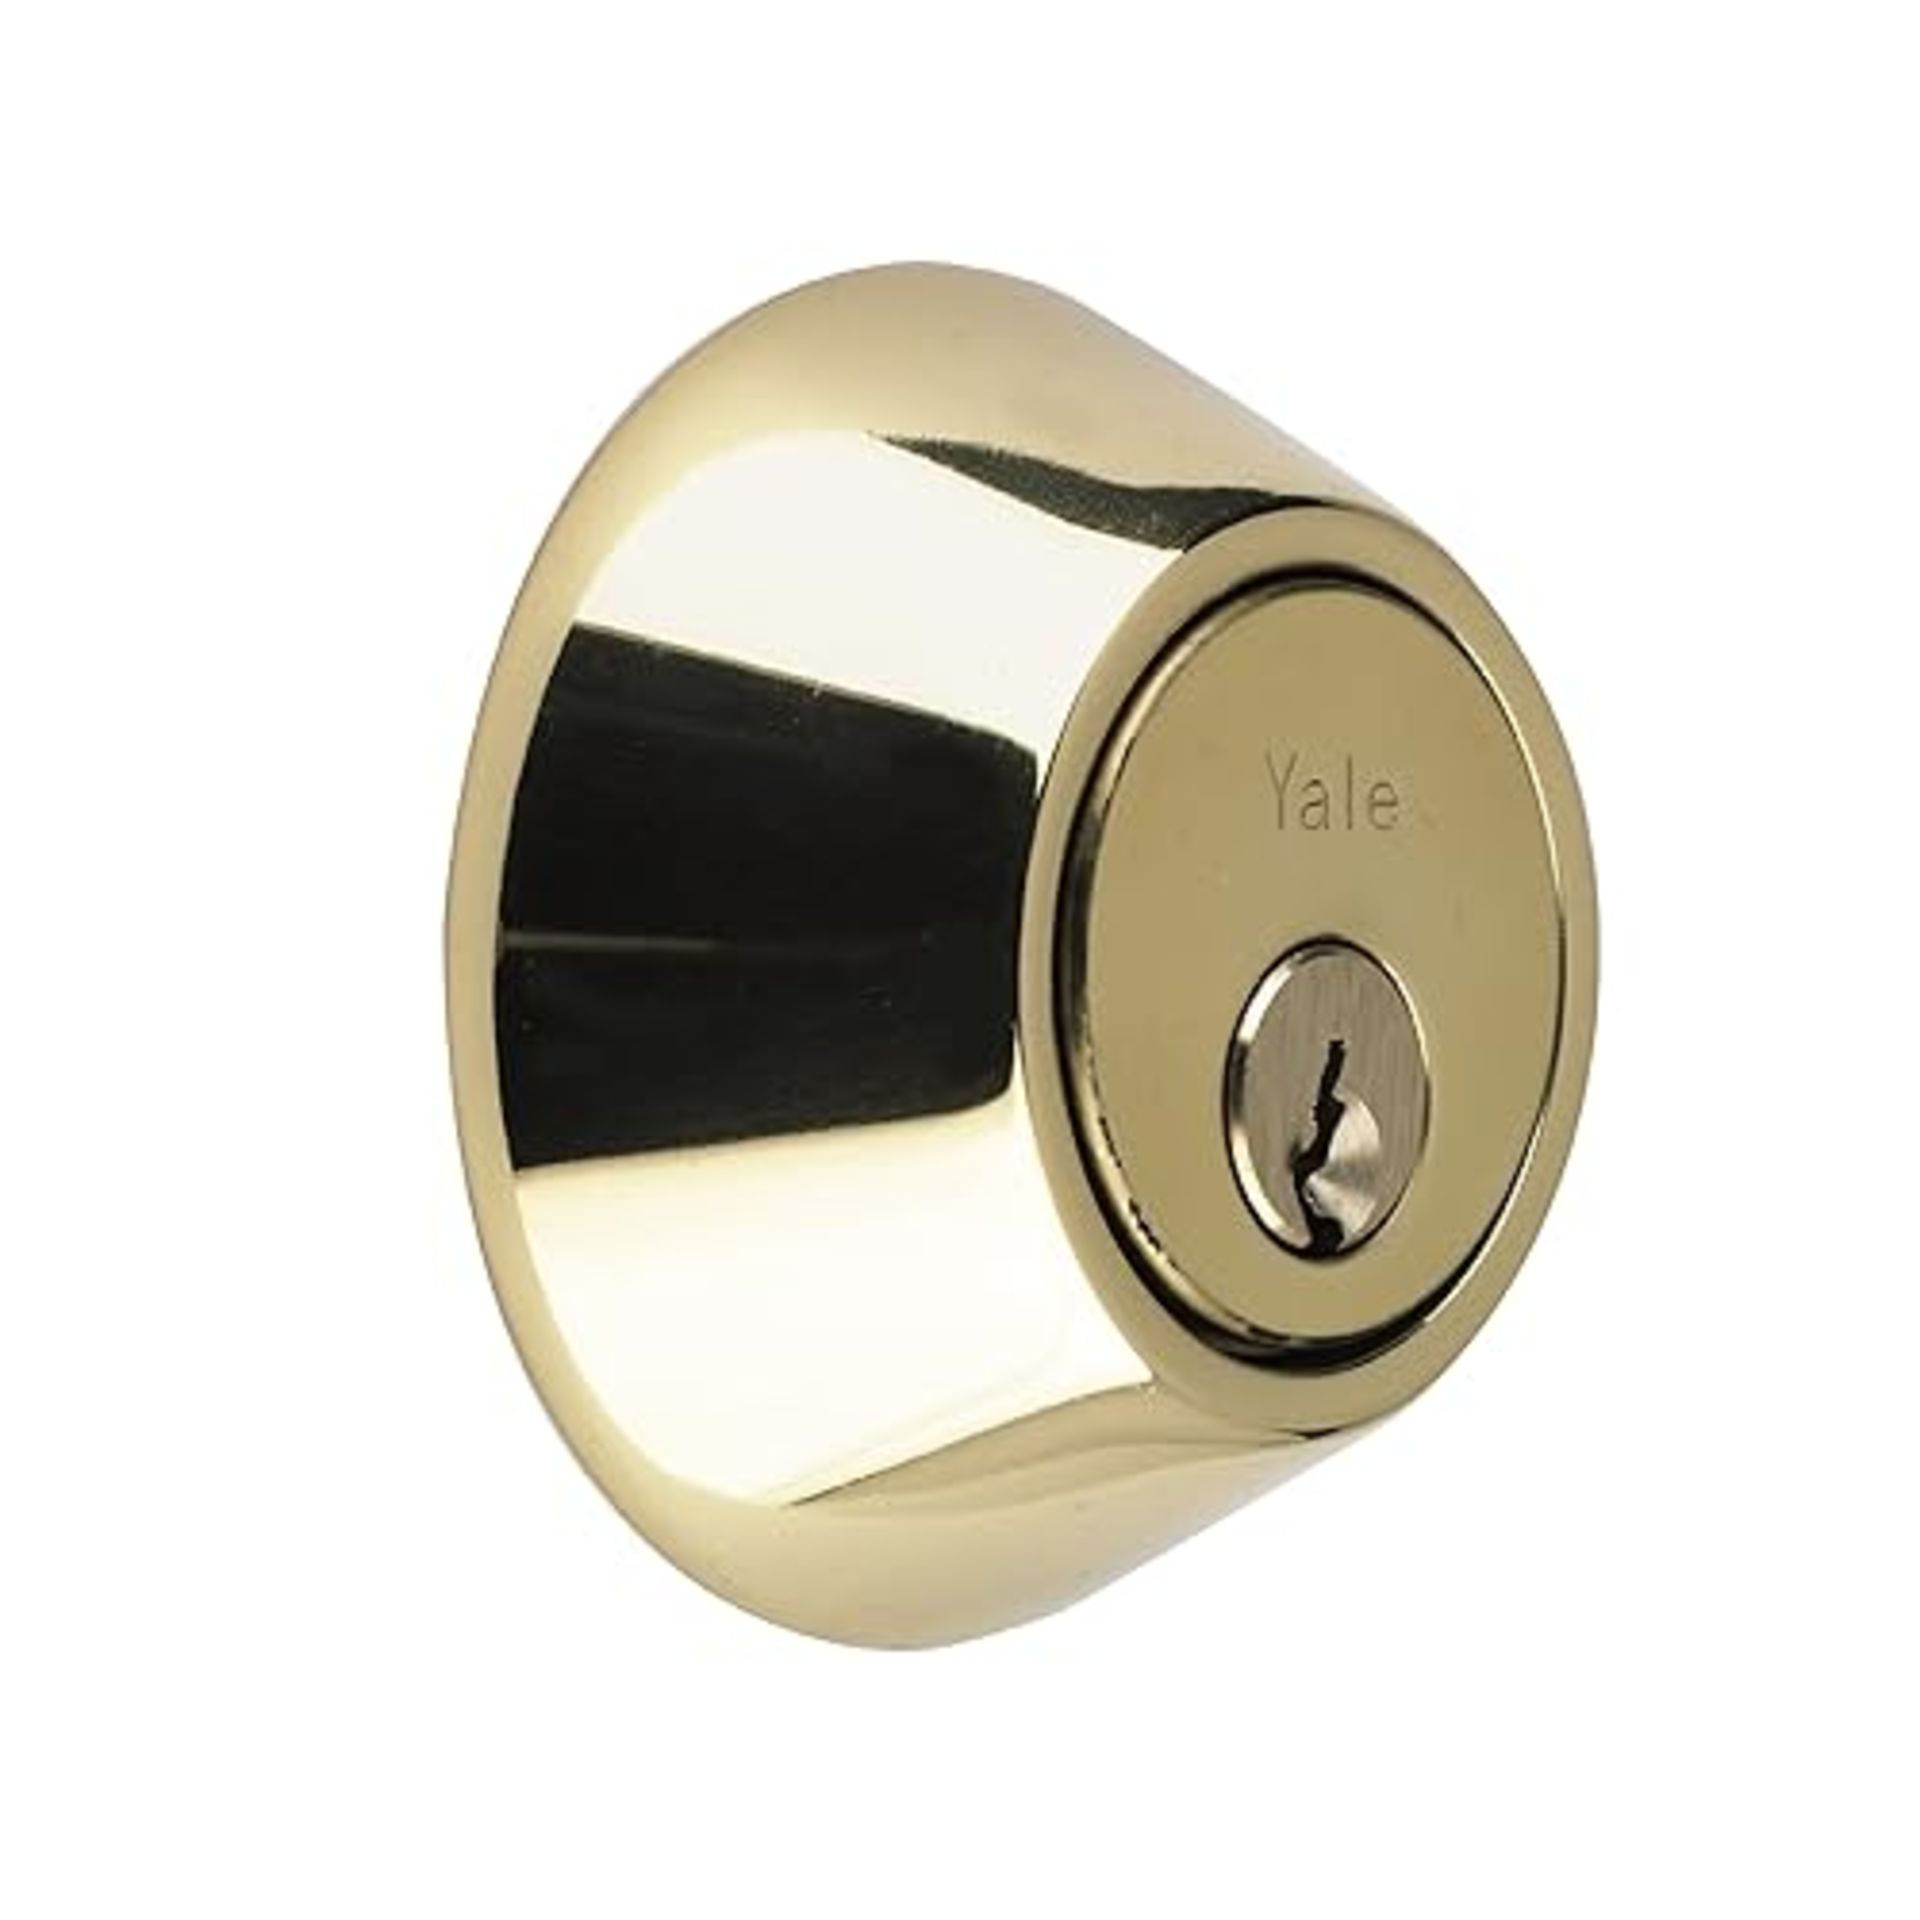 Yale P-5211 Security Deadbolt, Brass Finish, Standard Security, Visi Packed